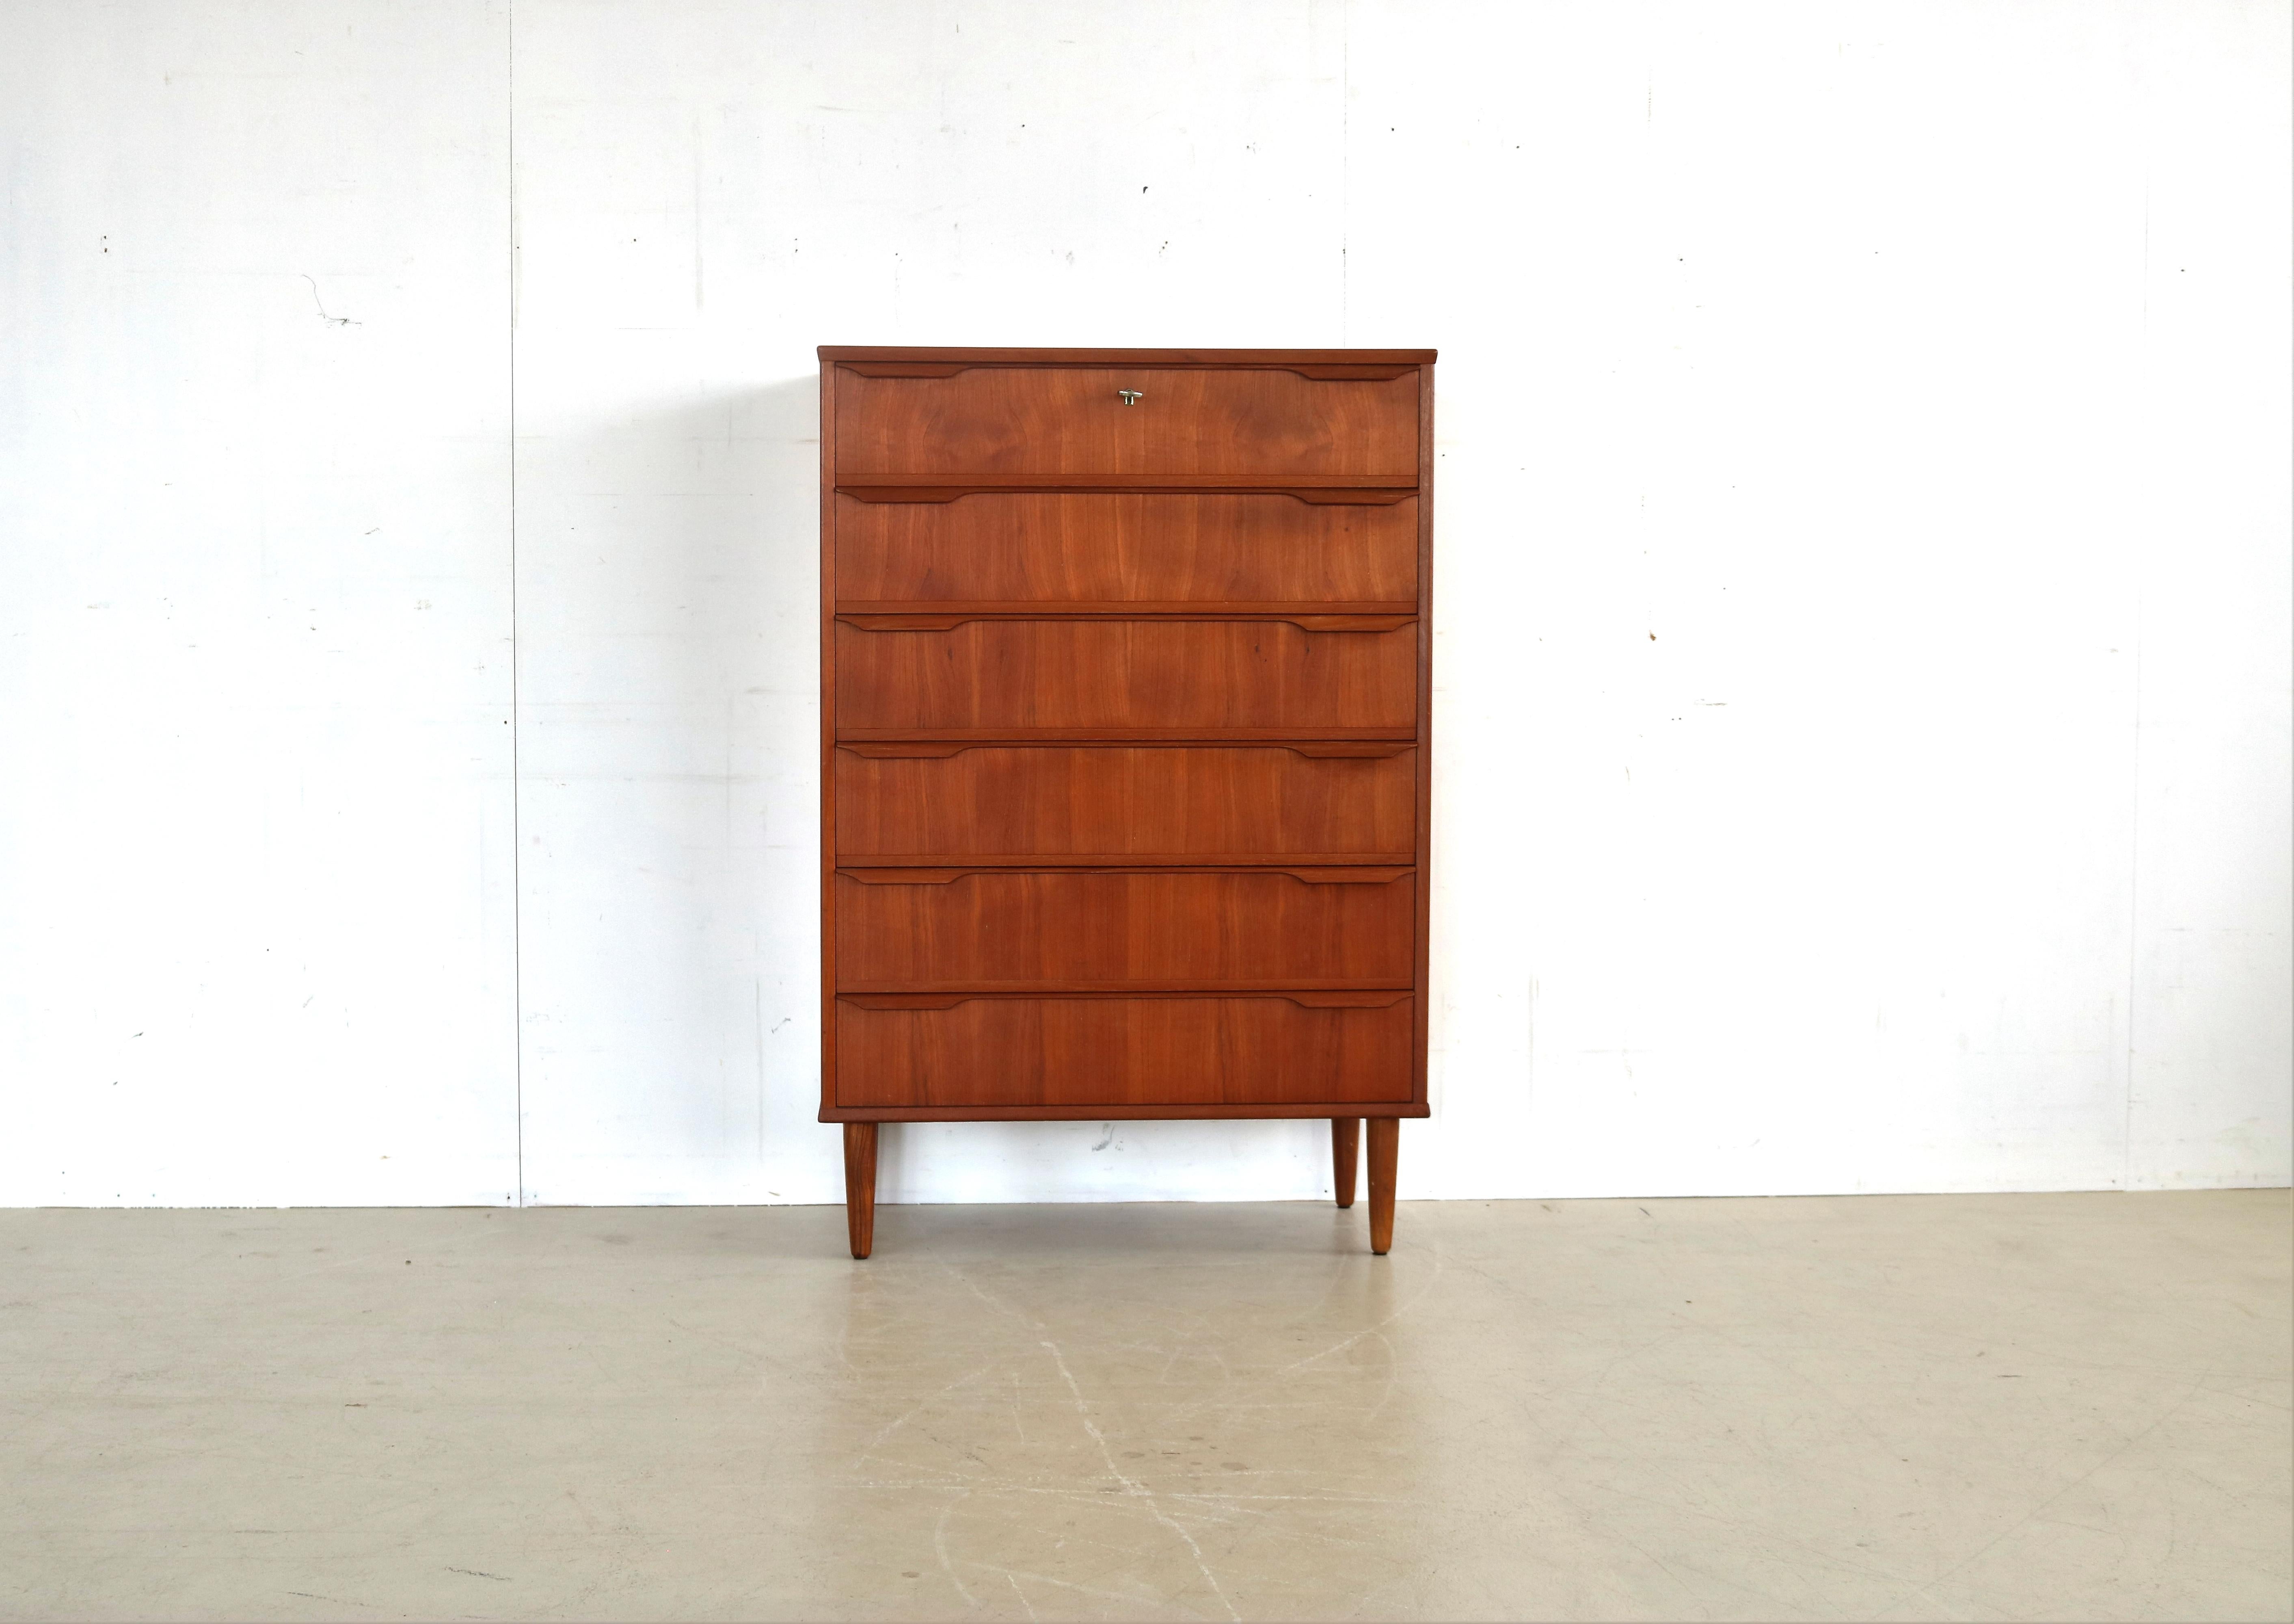 Vintage teak chest of drawers cabinet 60s Danish

design period 60's
designs unknown danish furniture Denmark
conditions good light signs of use
size 122 x 81.5 x 44 (HxWxD)

details teak;

article number 1610.